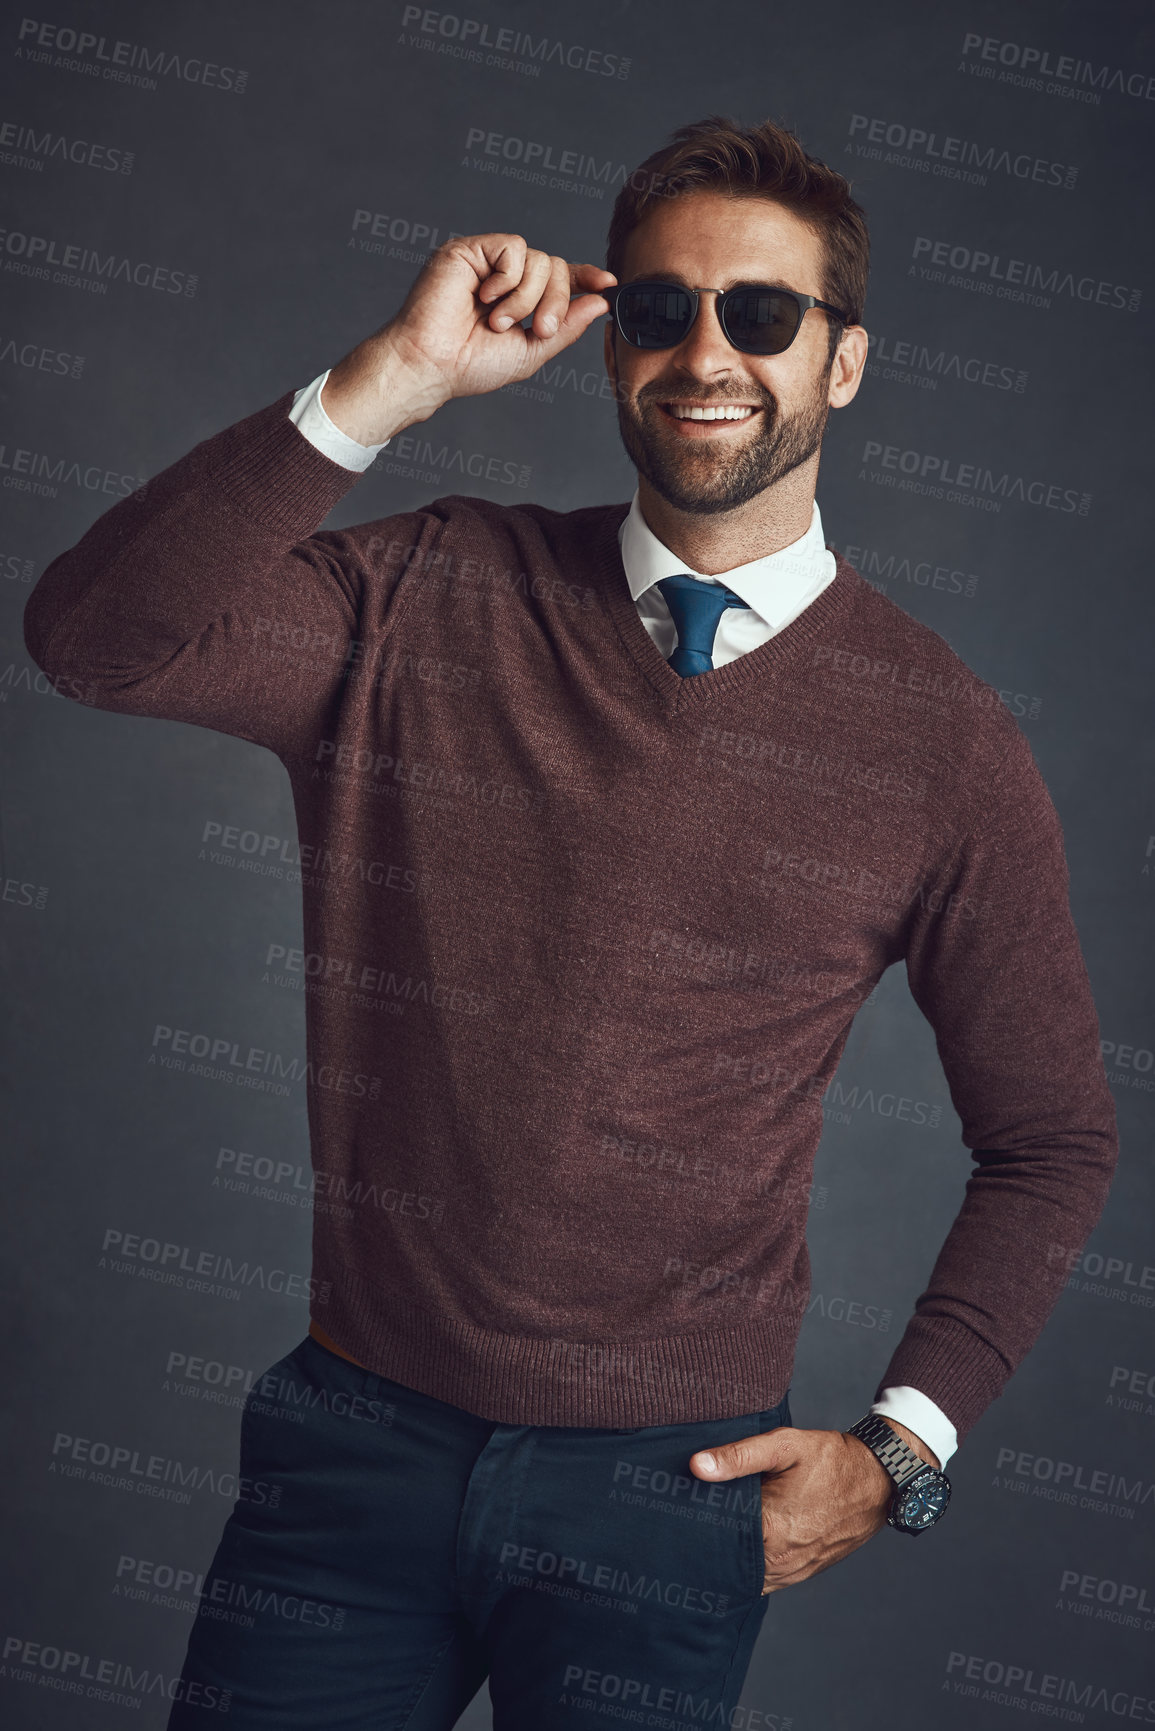 Buy stock photo Studio shot of a stylishly dressed young man posing against a gray background